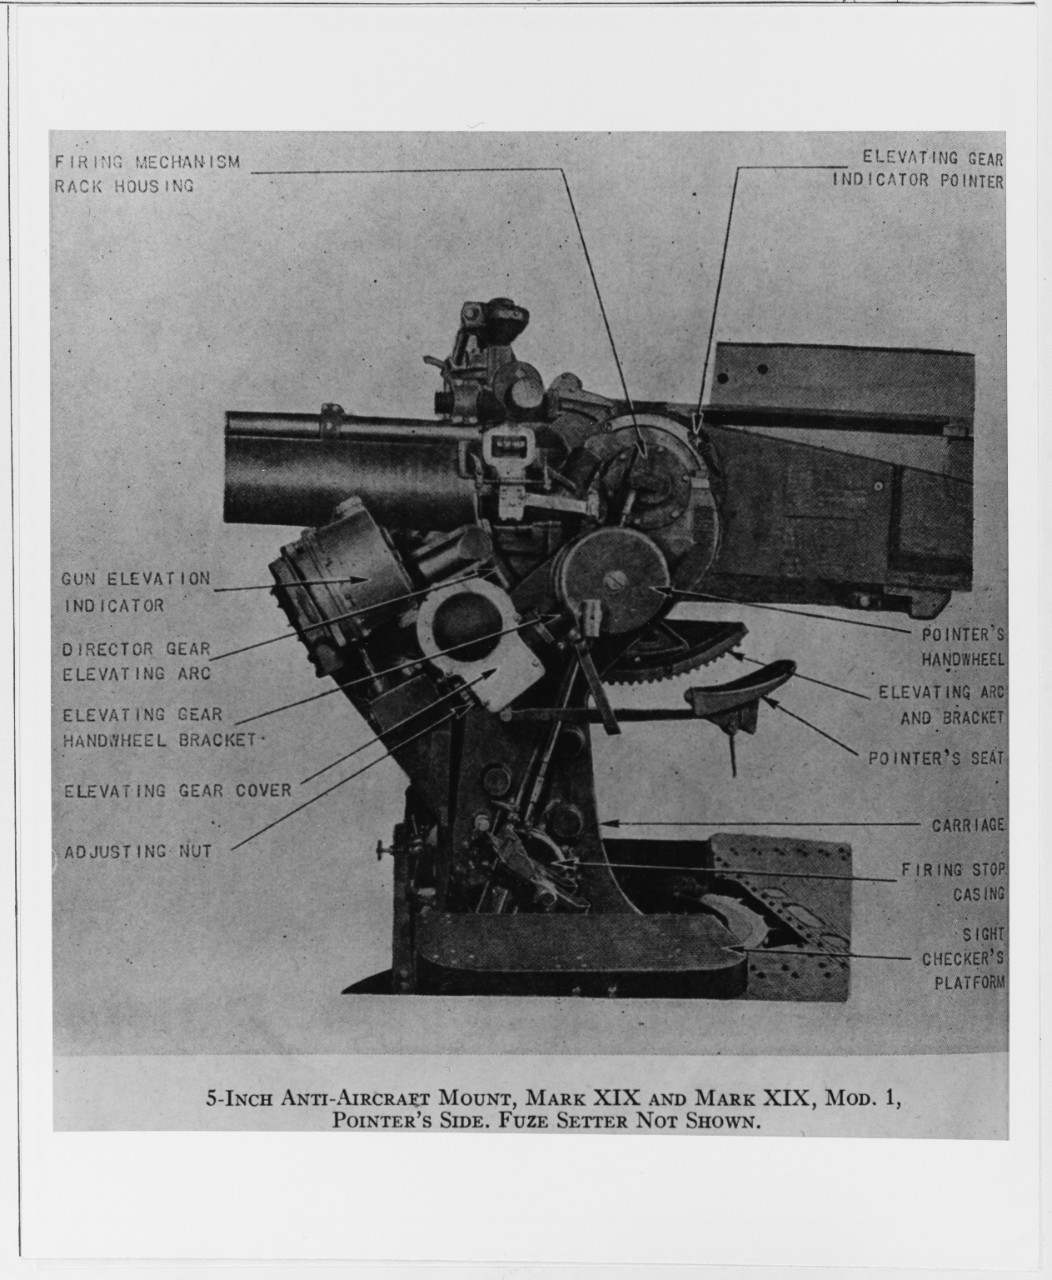 5 inch Anti-aircraft mount, Mark XIX and Mark XIX, Mod. 1, Pointer's Side